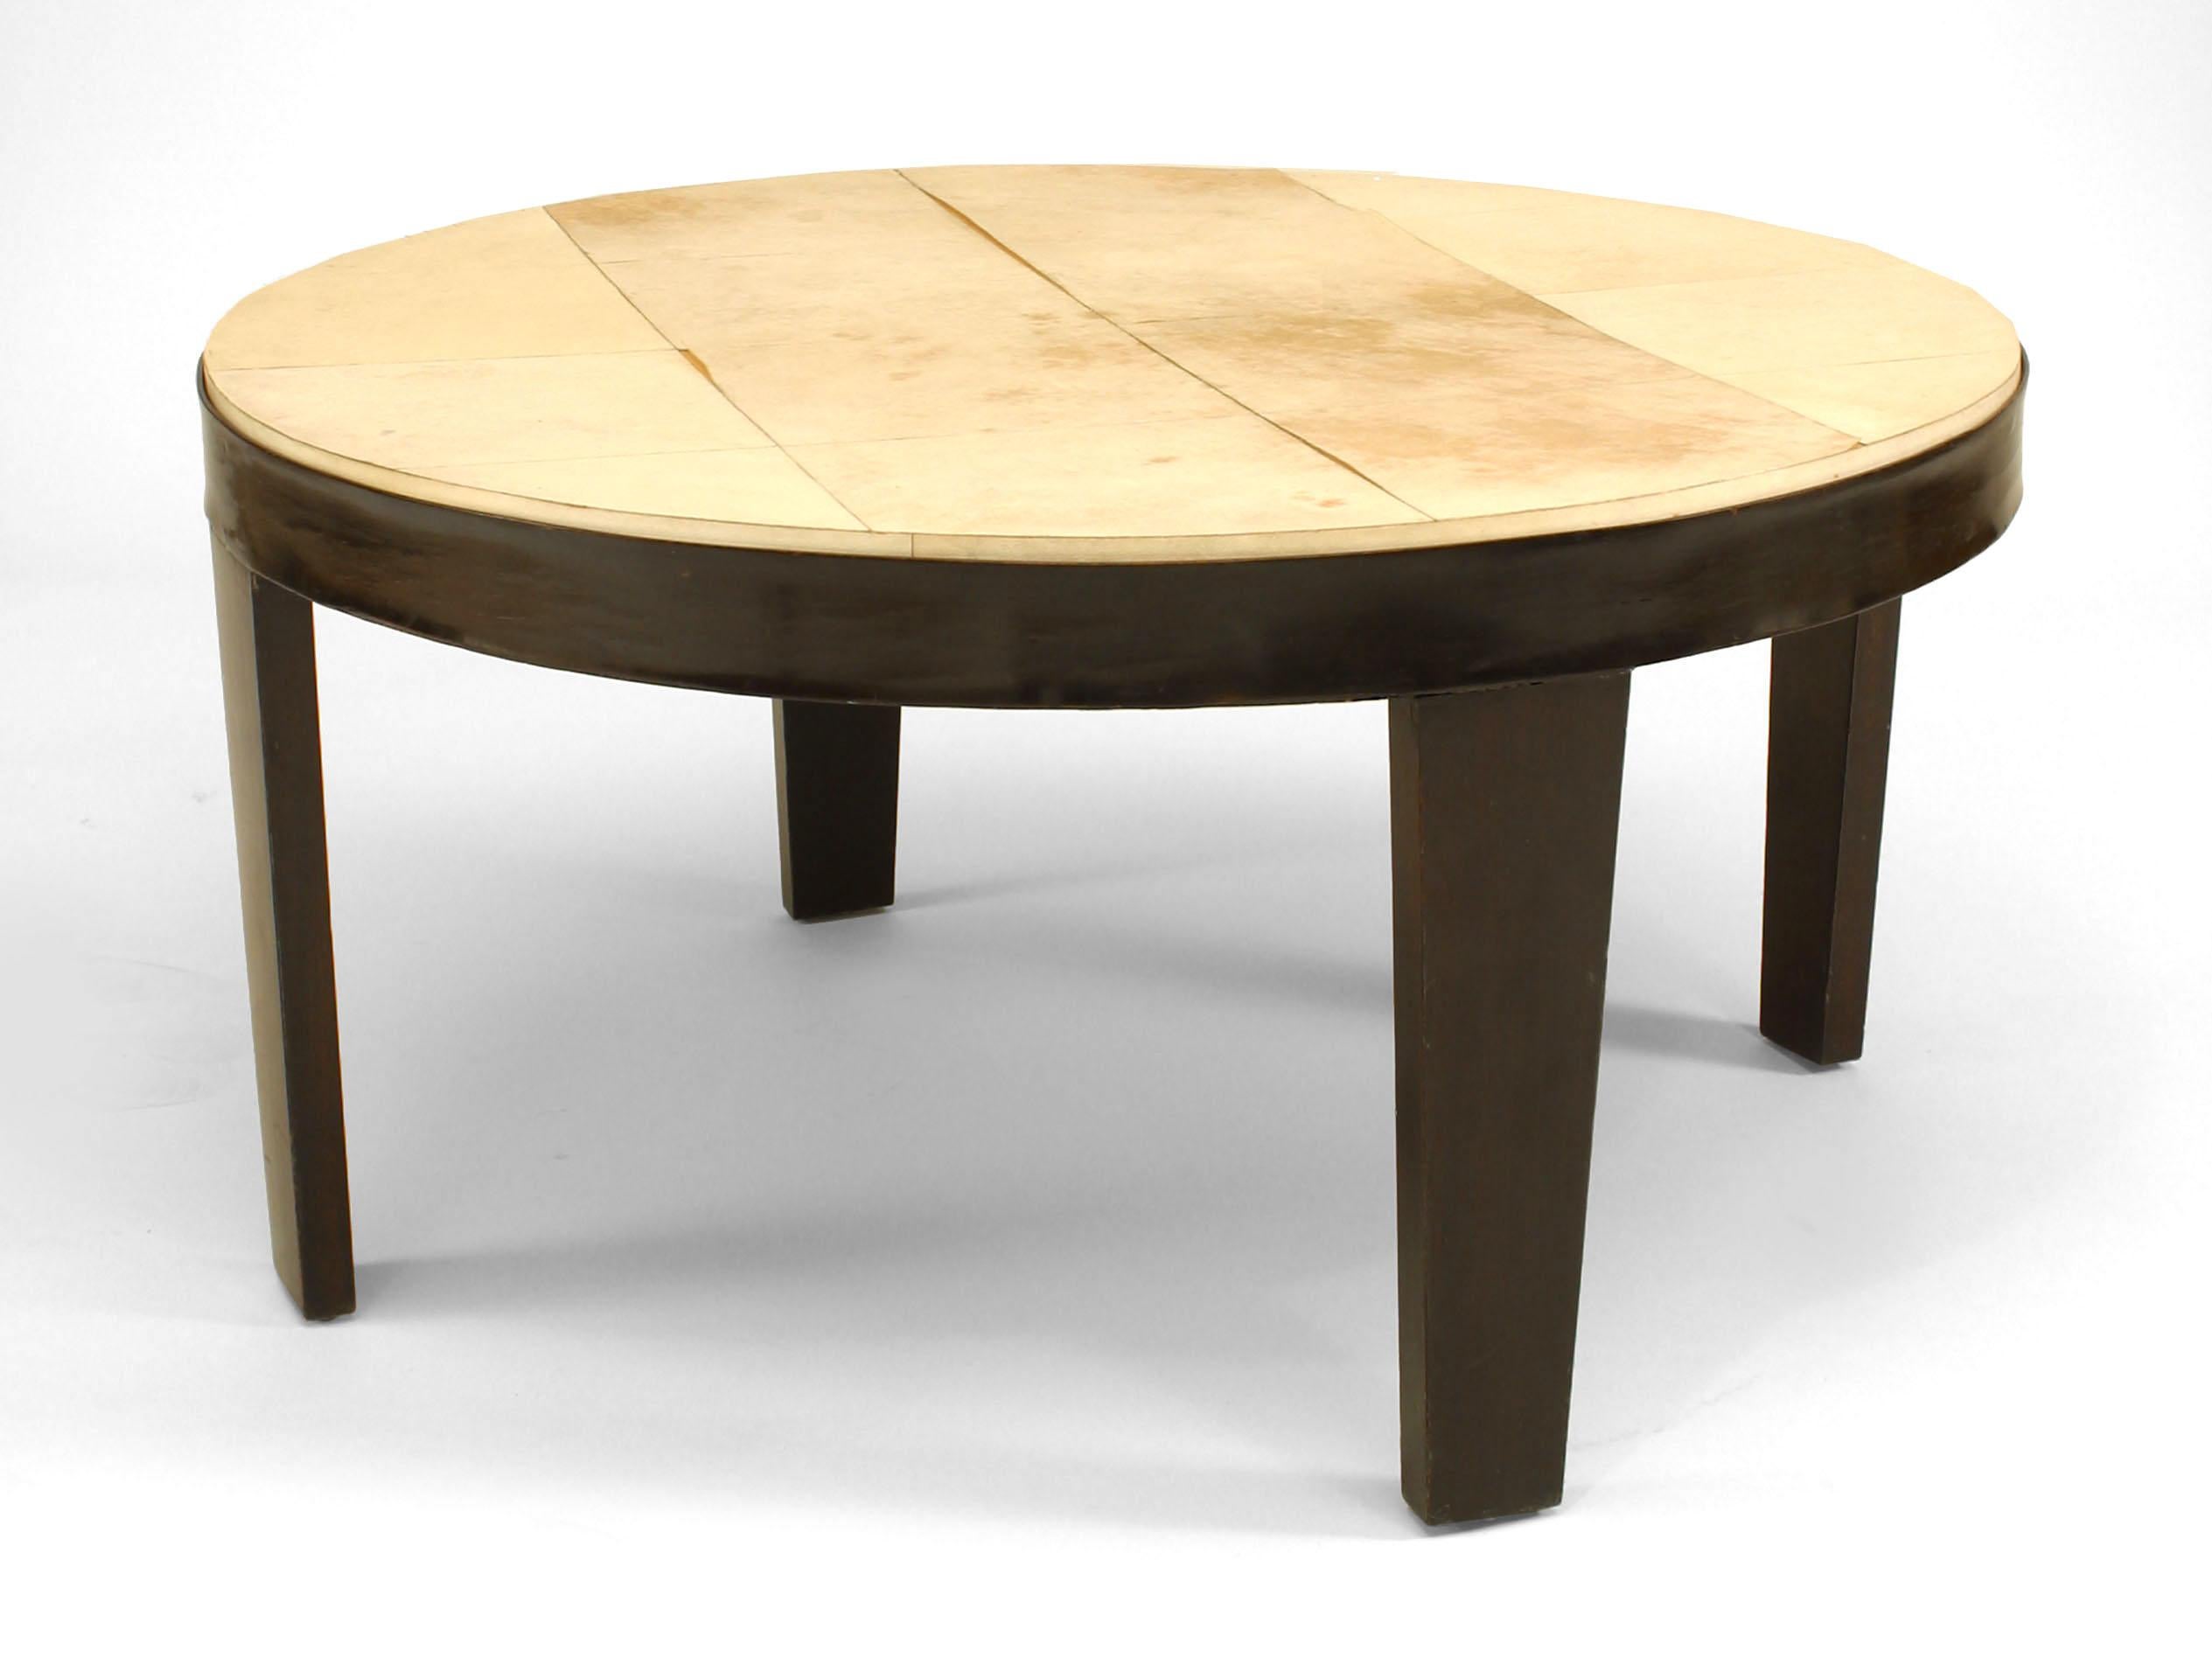 Italian Mid-Century (1950s) round parchment top coffee table with four ebonized wooden legs.
